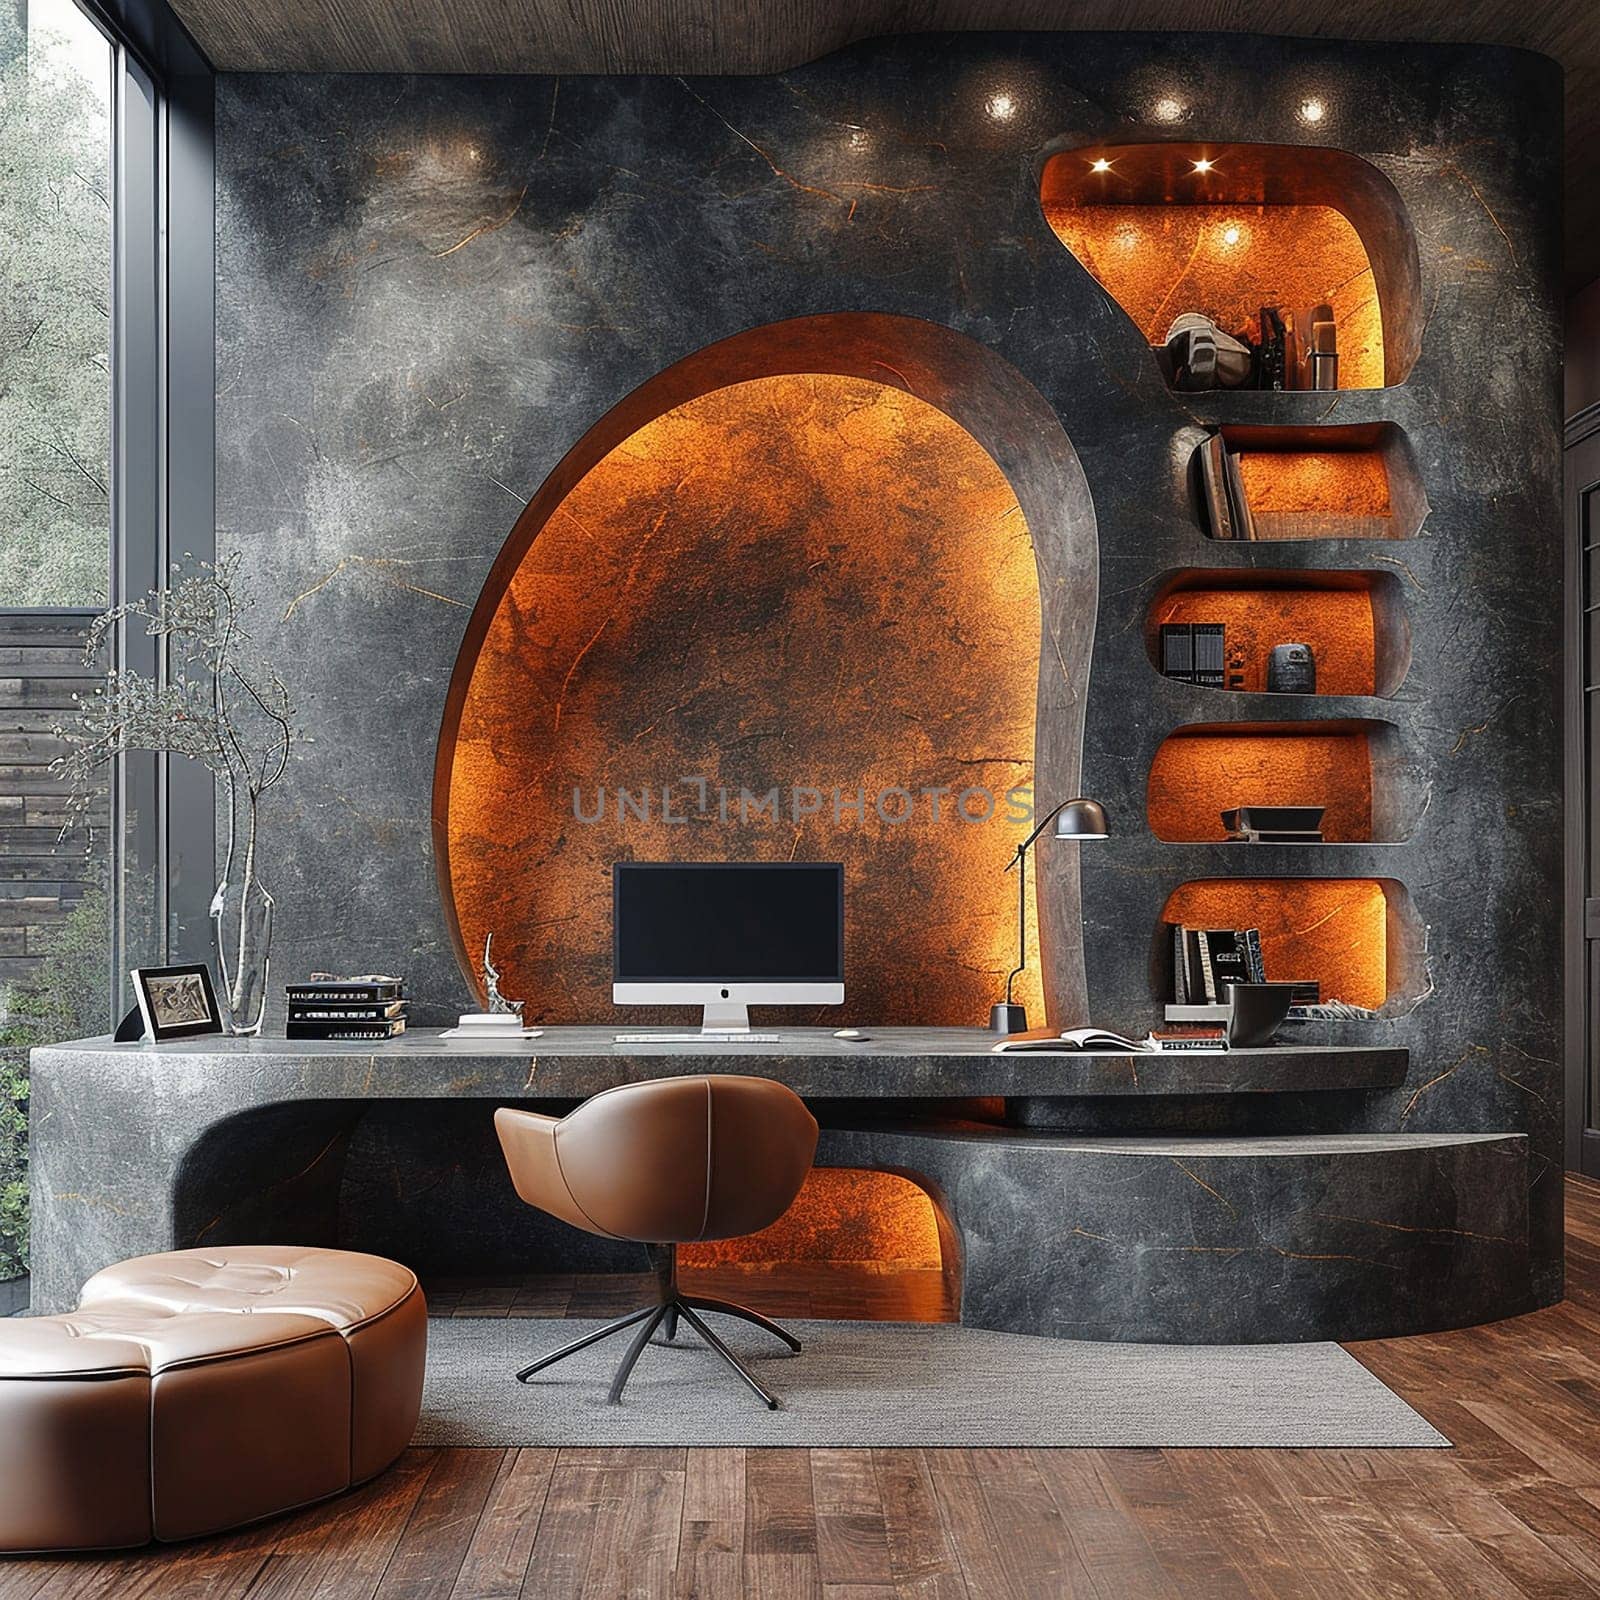 The unusual interior of the room is carved into the rock. High quality photo